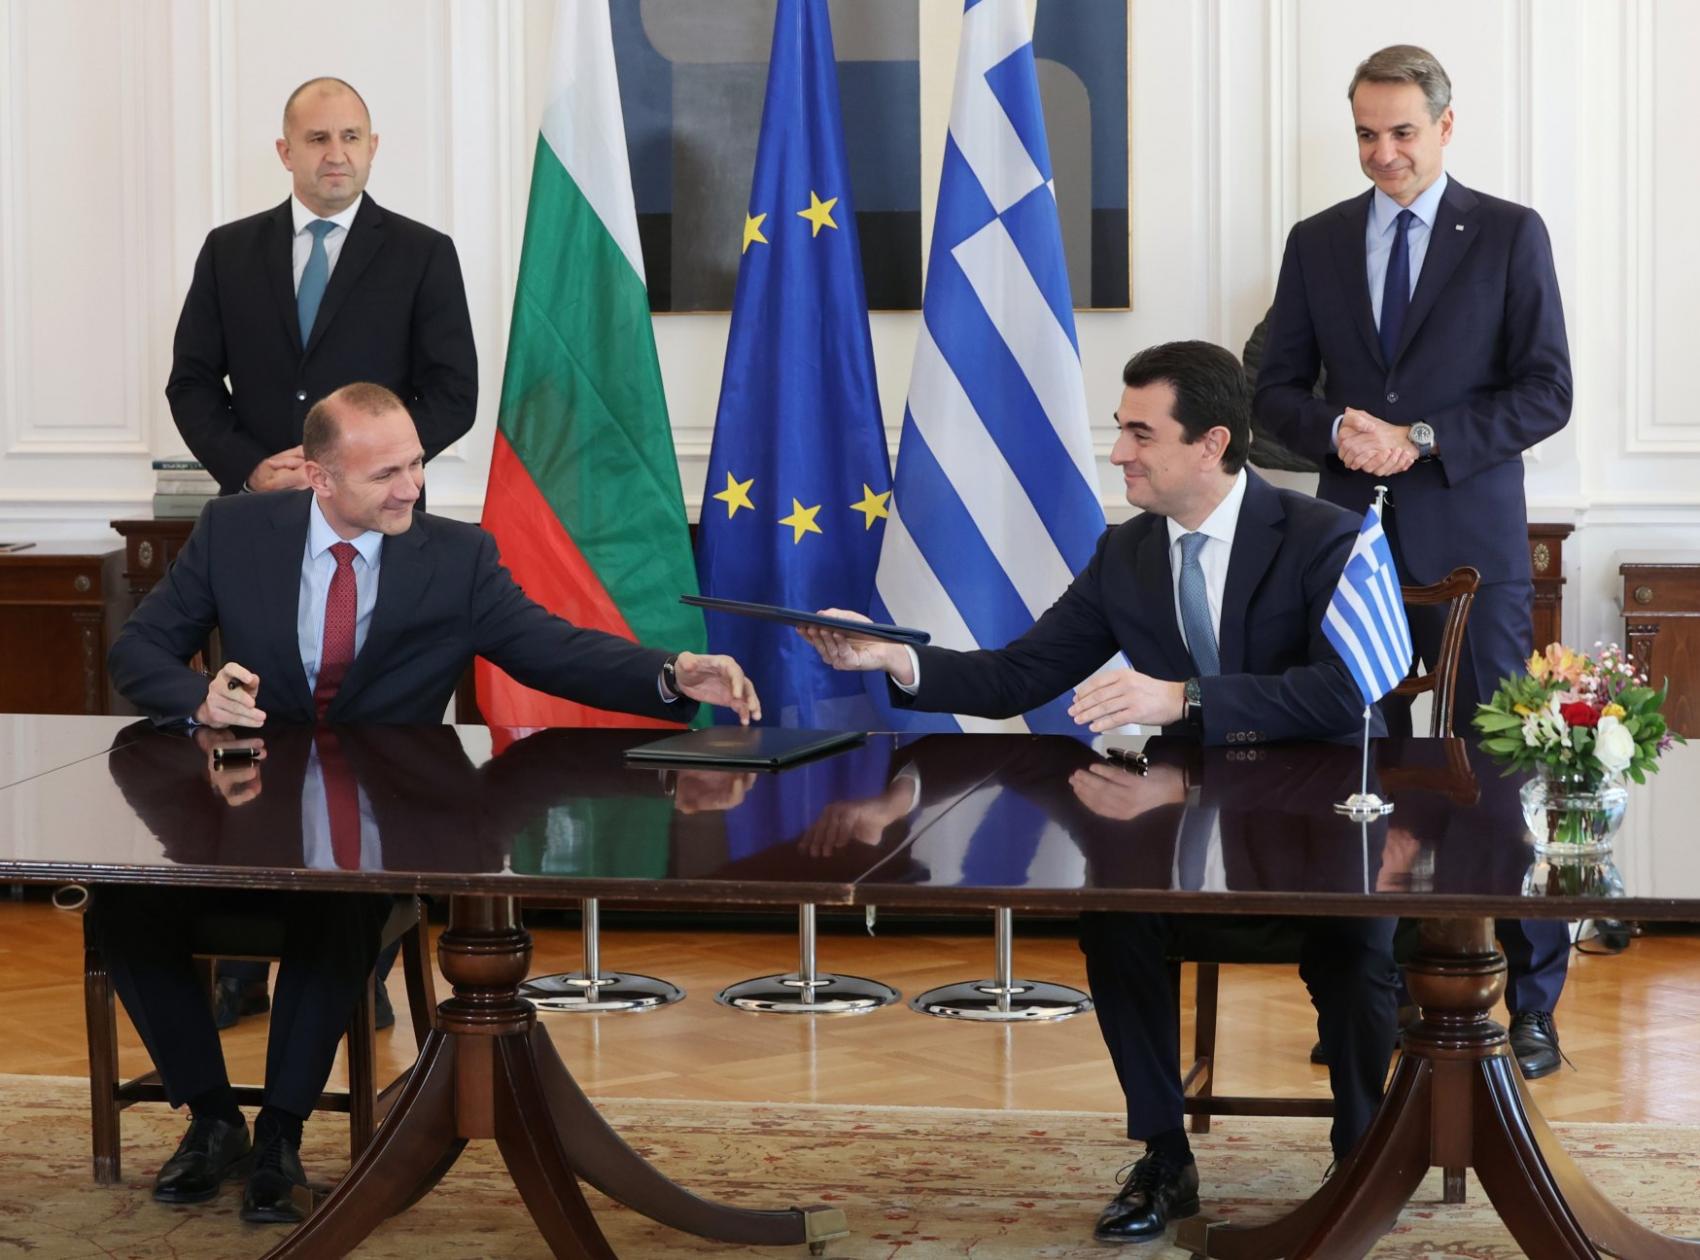 Memorandums of cooperation between Bulgaria and Greece were signed in